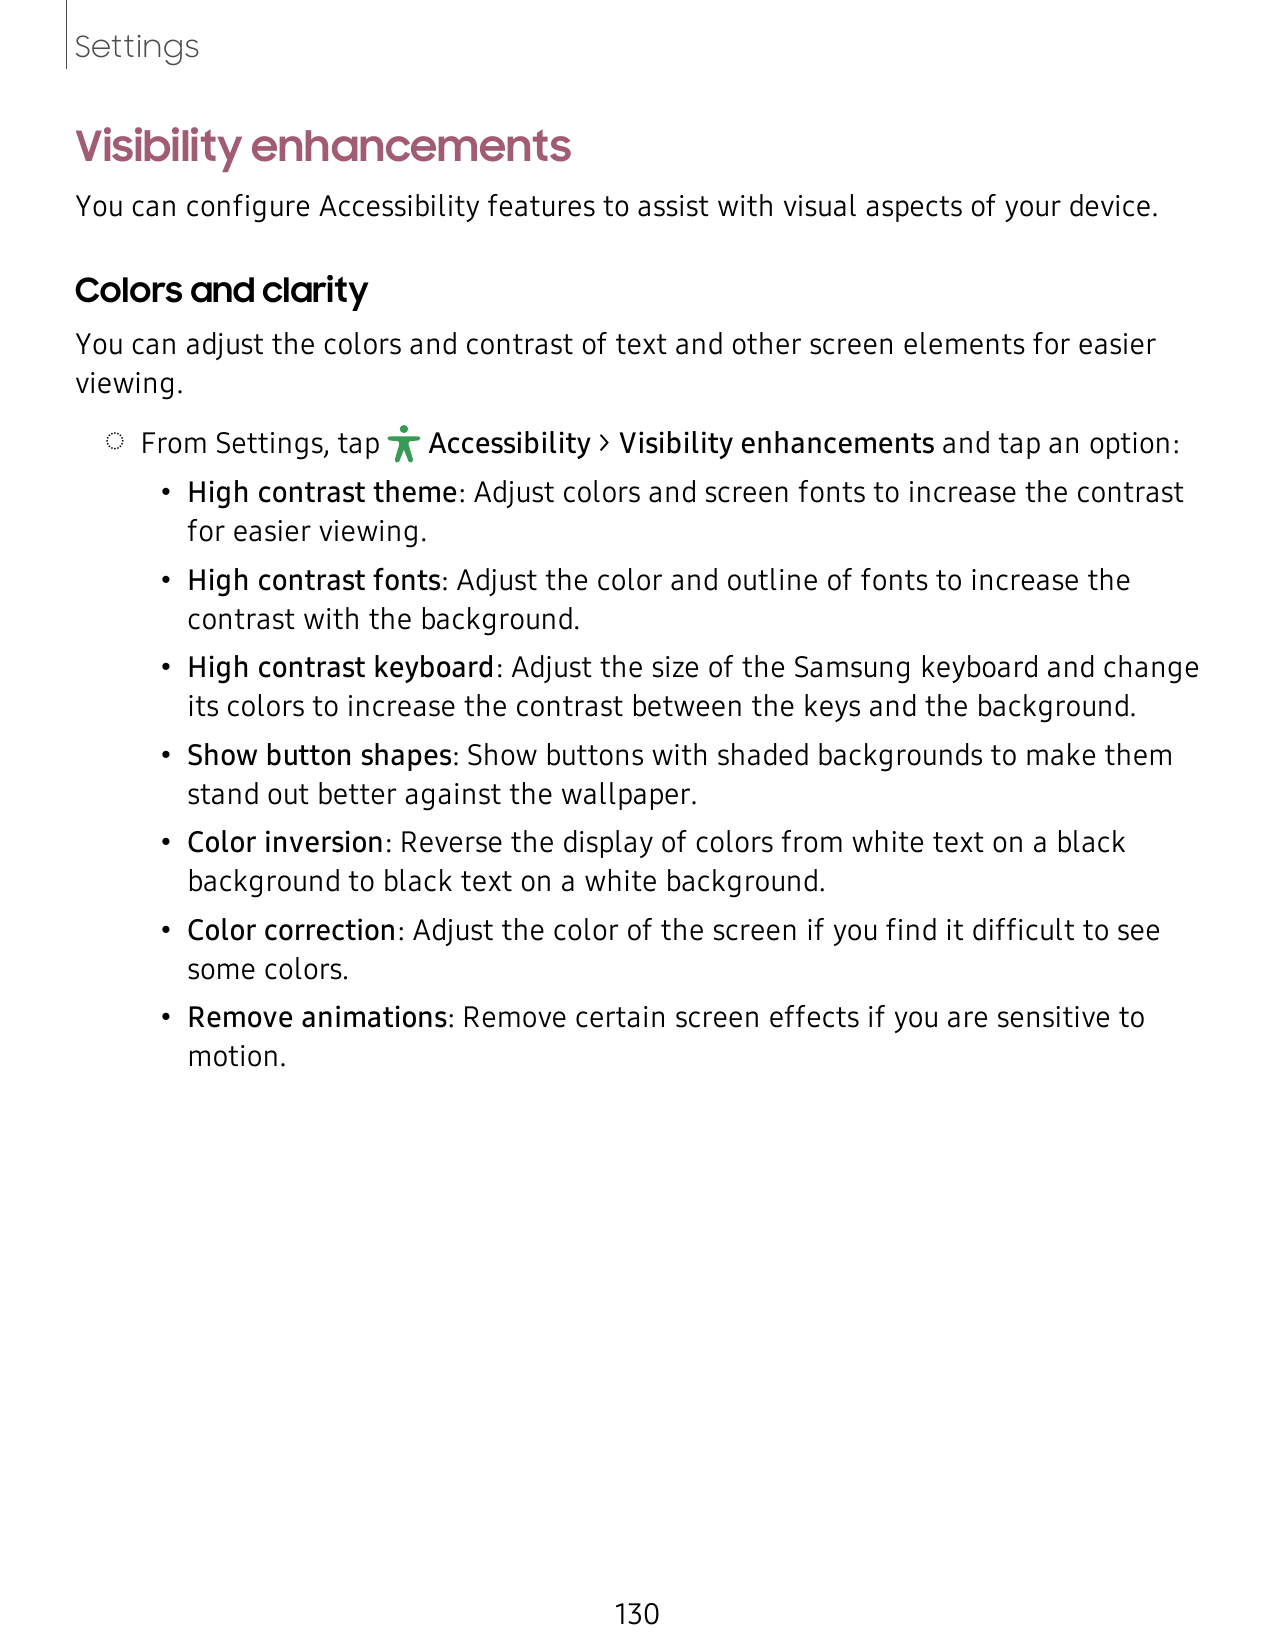 SettingsVisibility enhancementsYou can configure Accessibility features to assist with visual aspects of your device.Colors and 